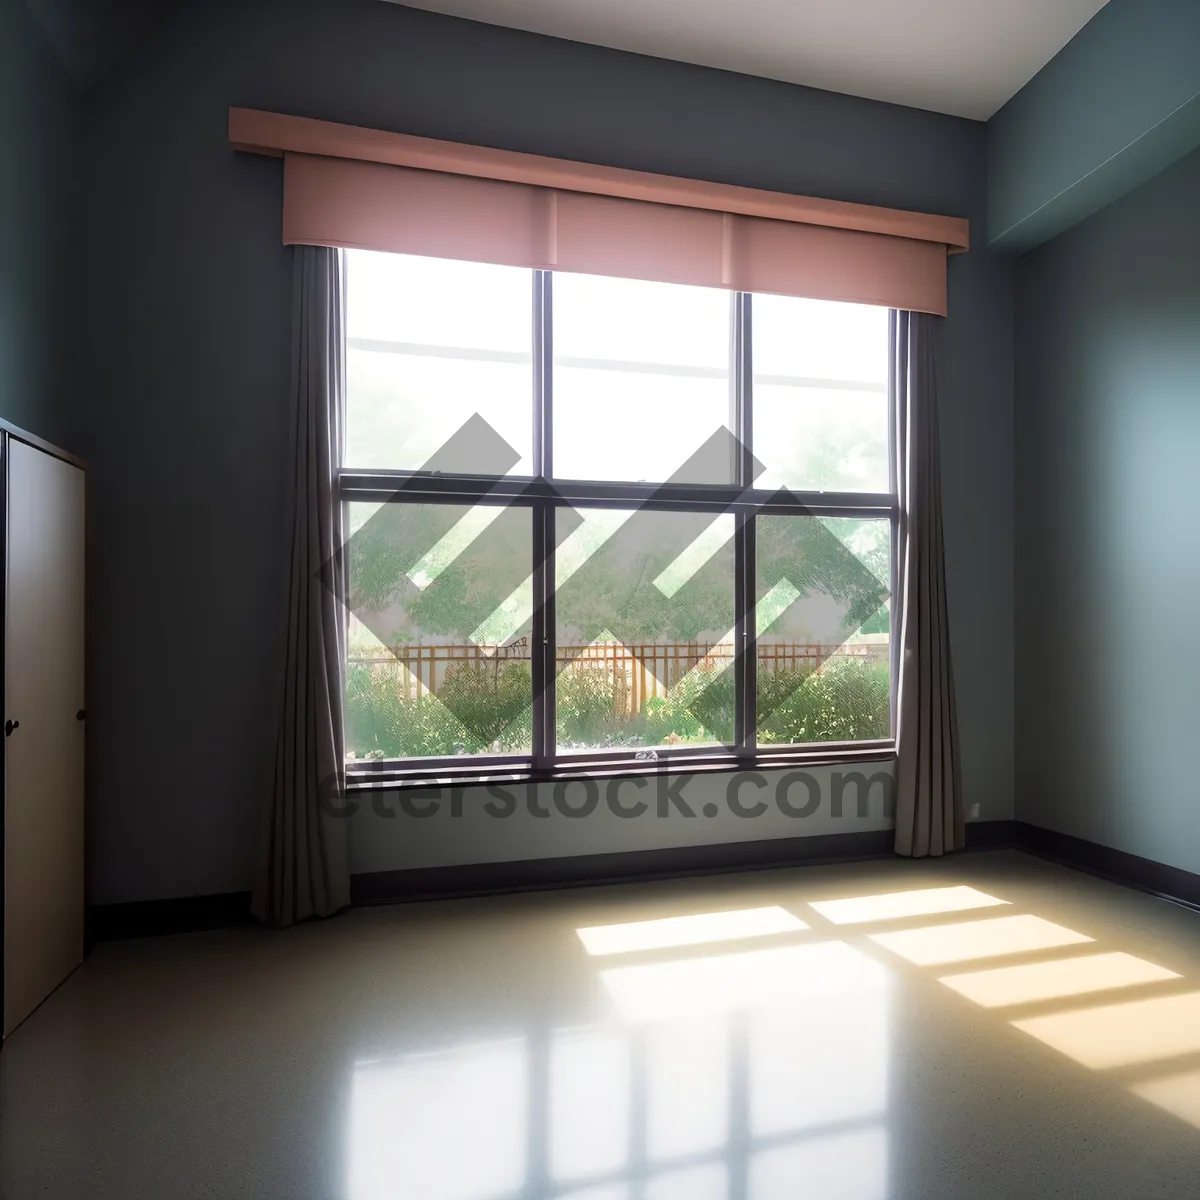 Picture of Modern Wood-Framed Corner Window in Contemporary Living Space